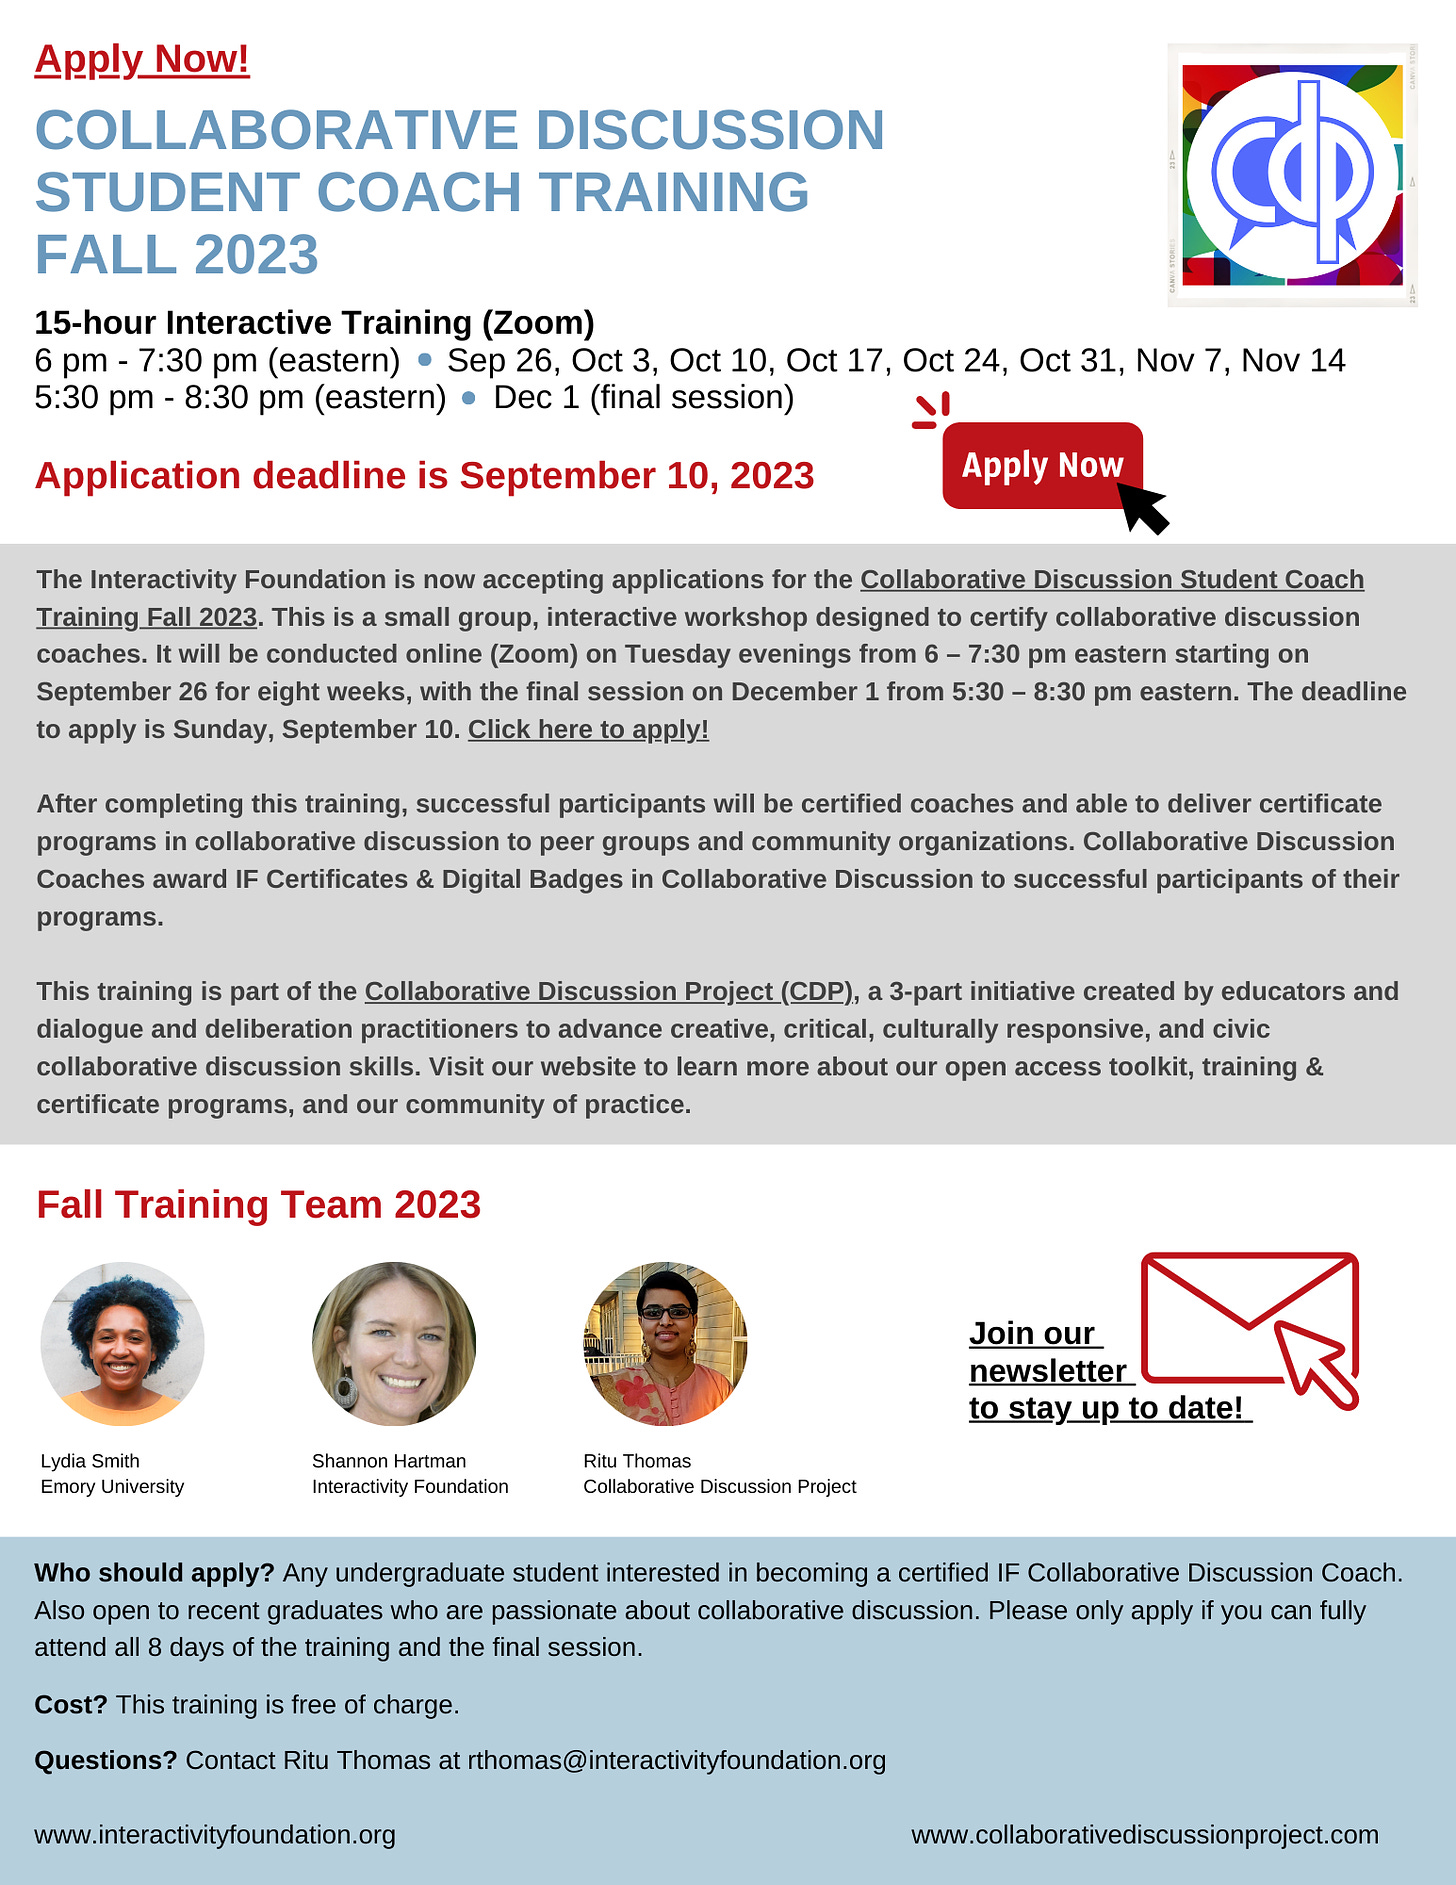 Student Coach Training Fall 2023 Flyer